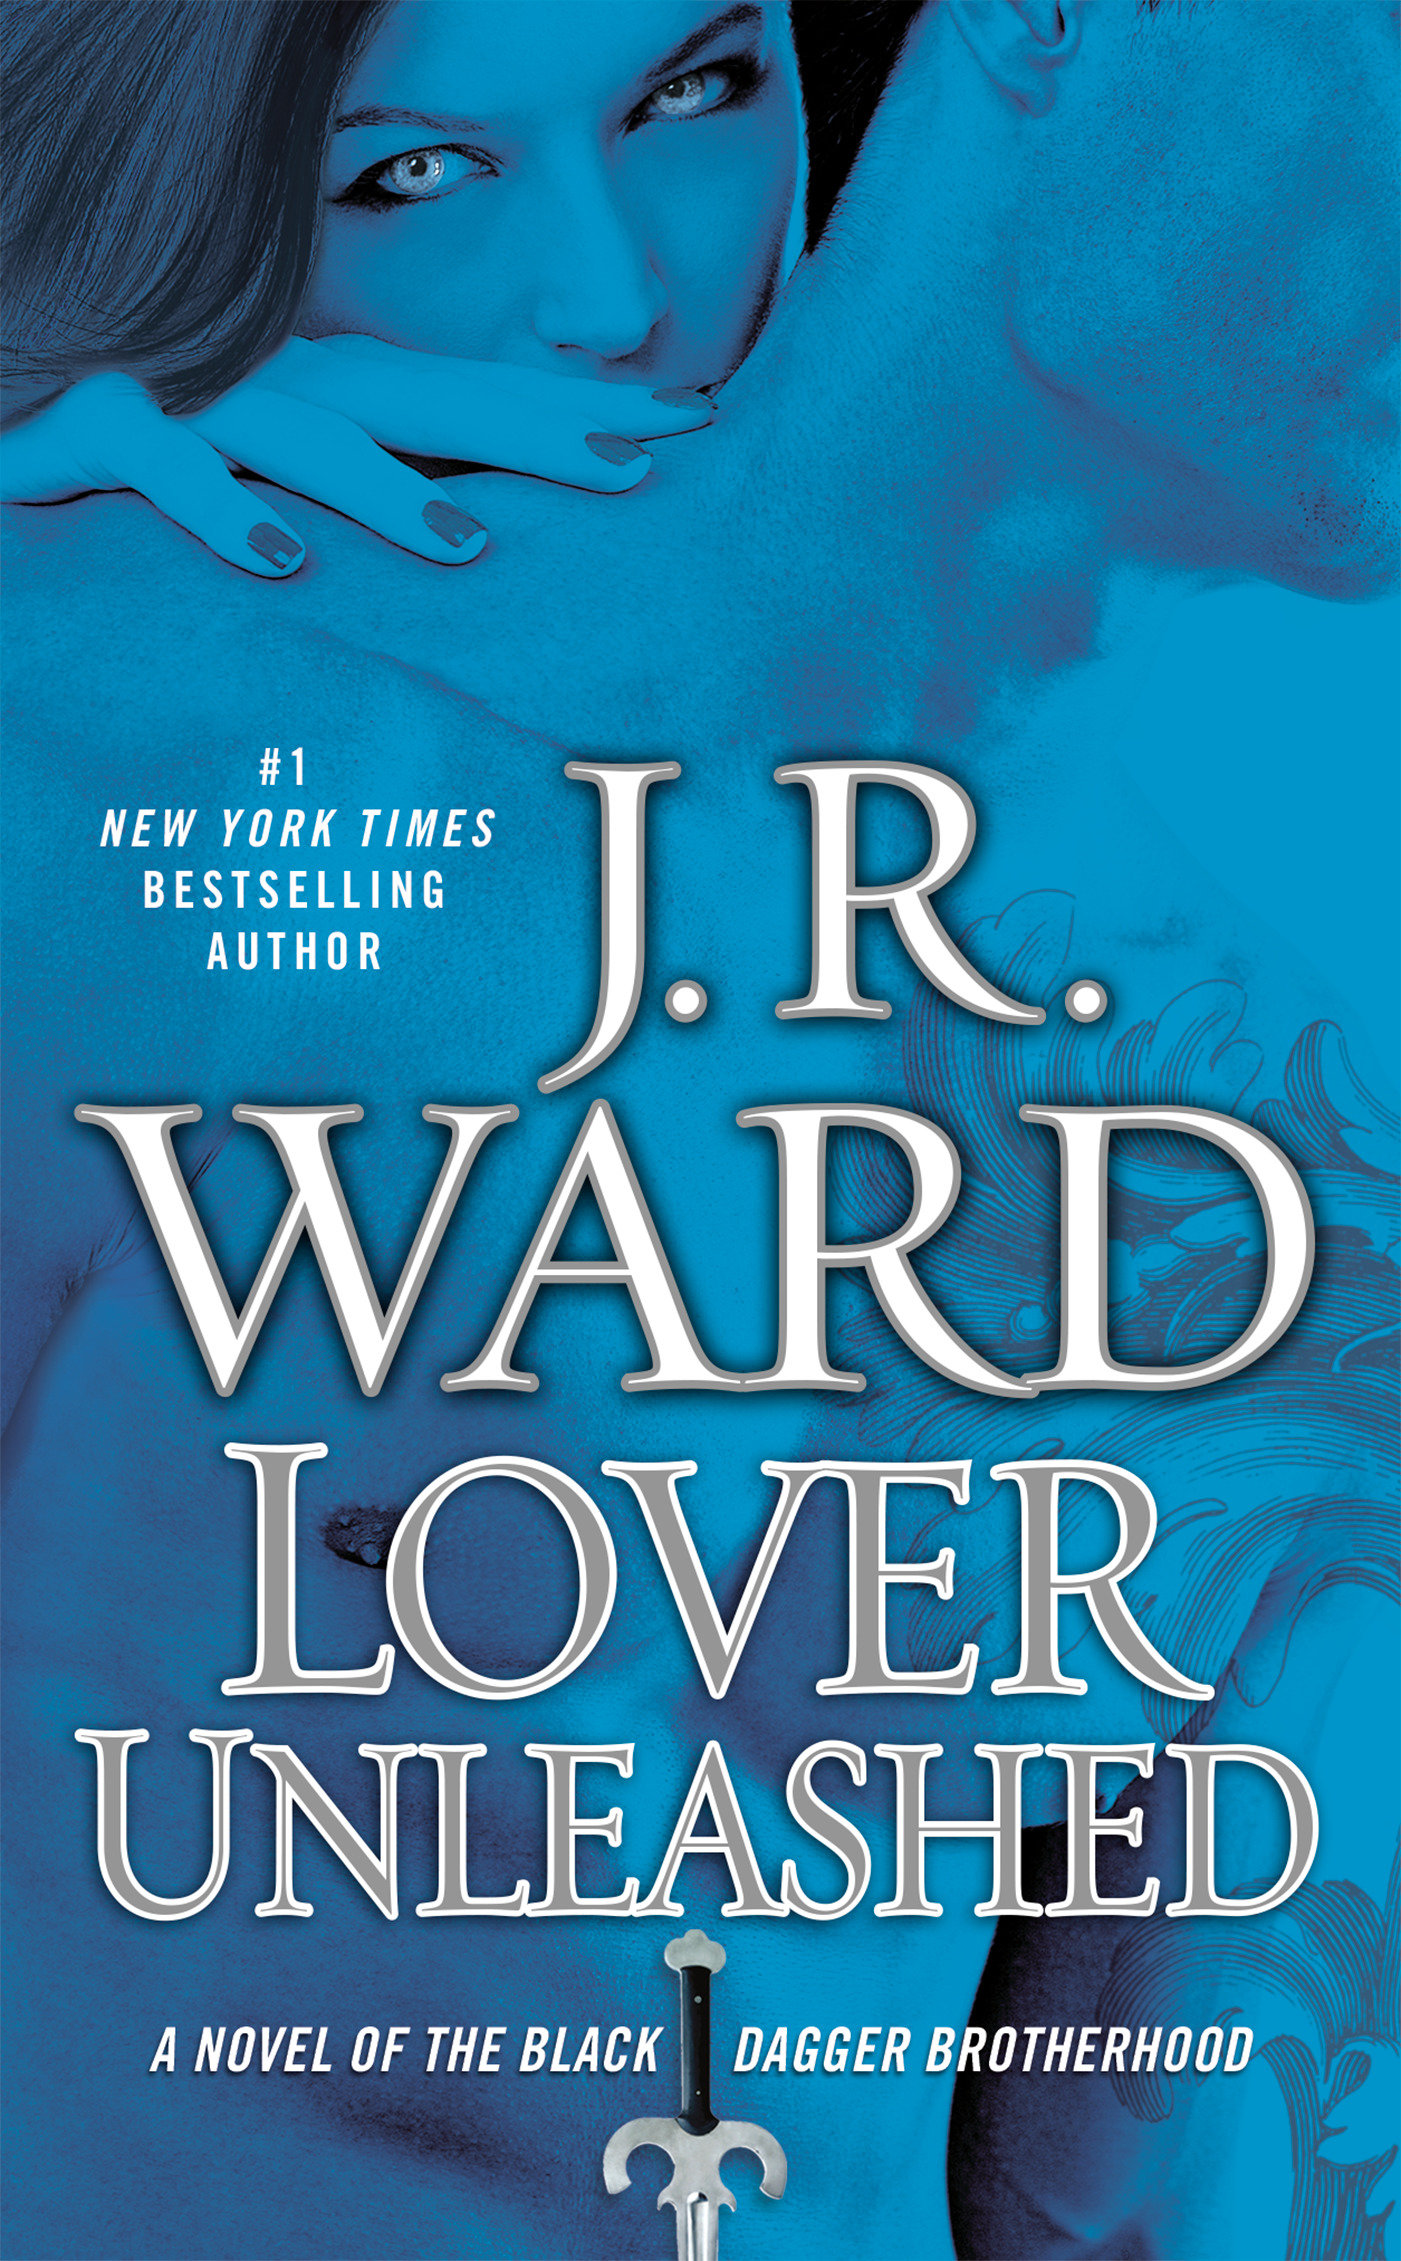 Lover unleashed cover image